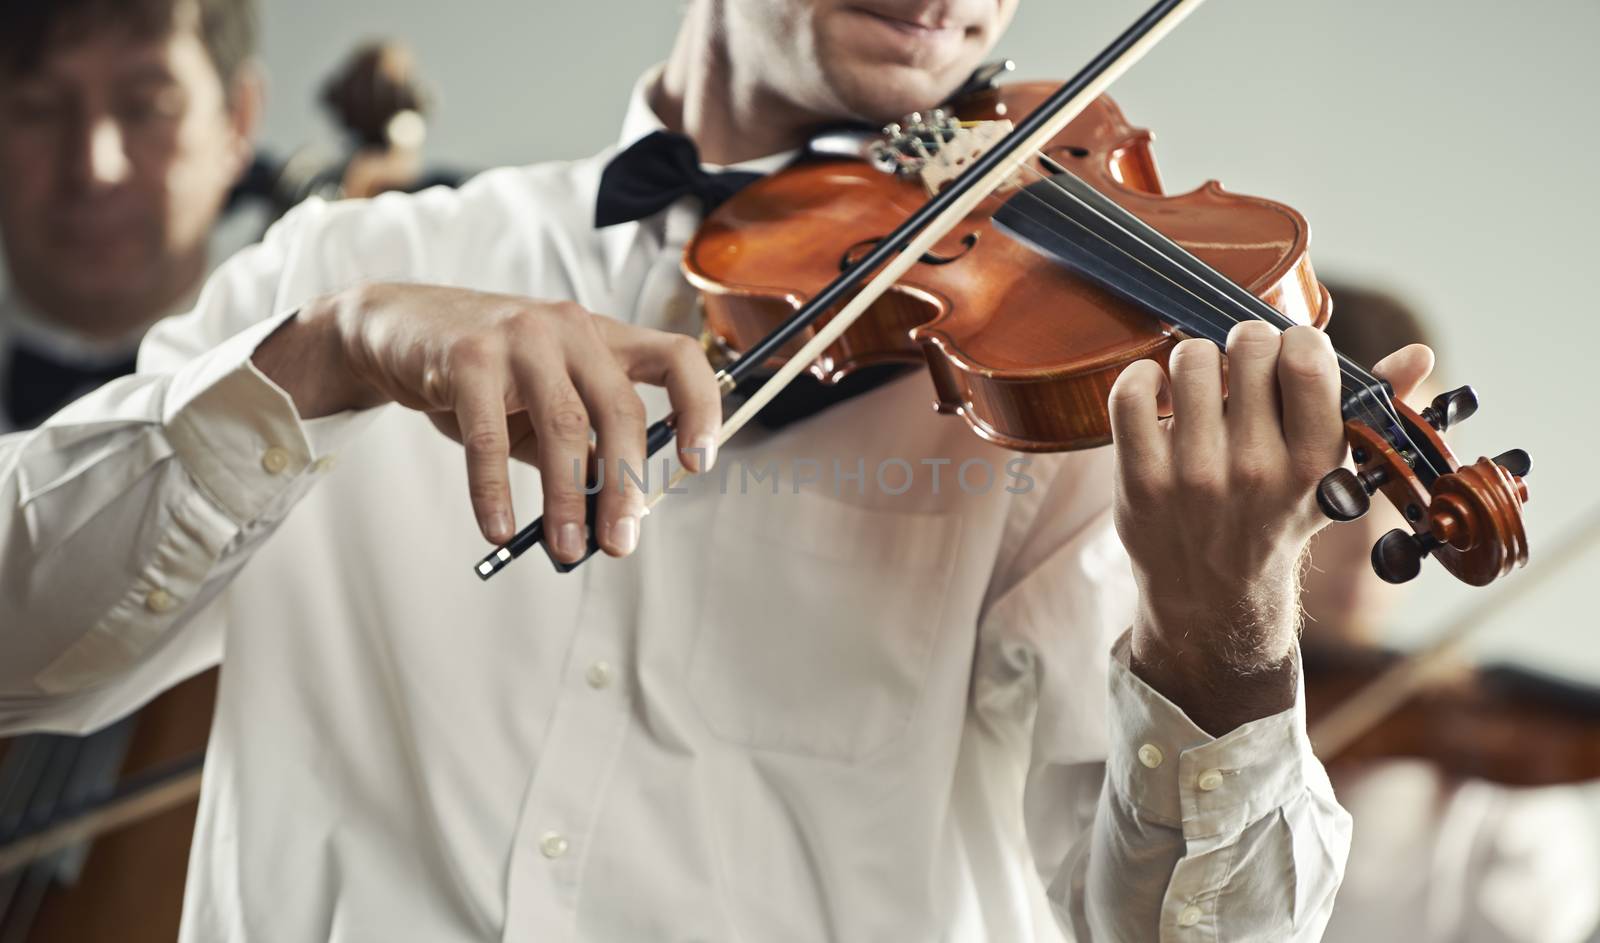 Classical music: Violinist playing at the concert